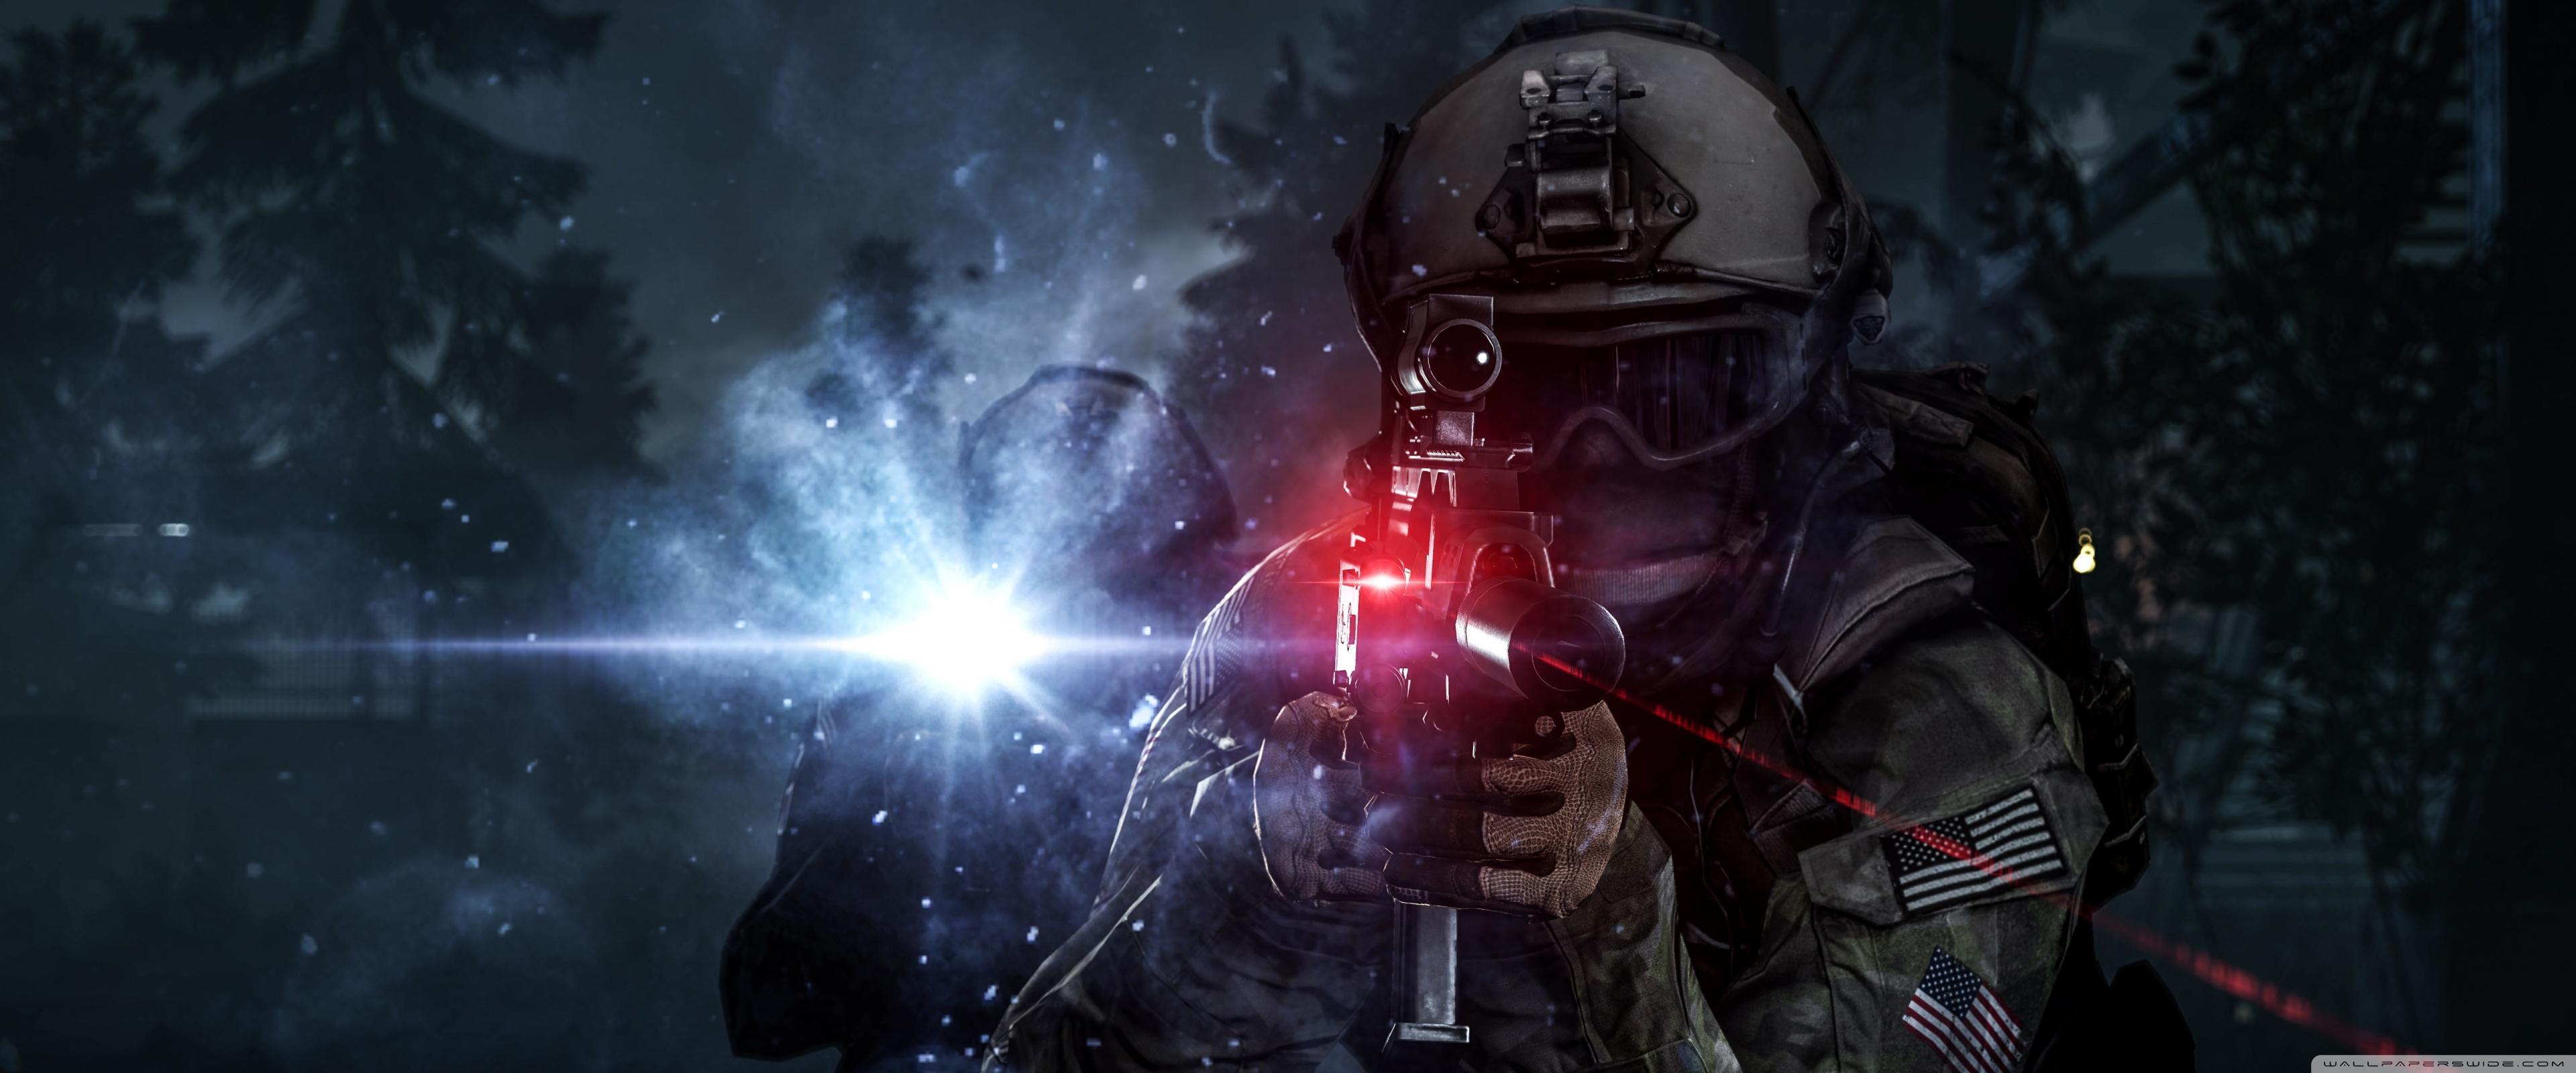 Battlefield 4 {EPIC TACTICAL PUSH!} HD Wallpaper. Background Image